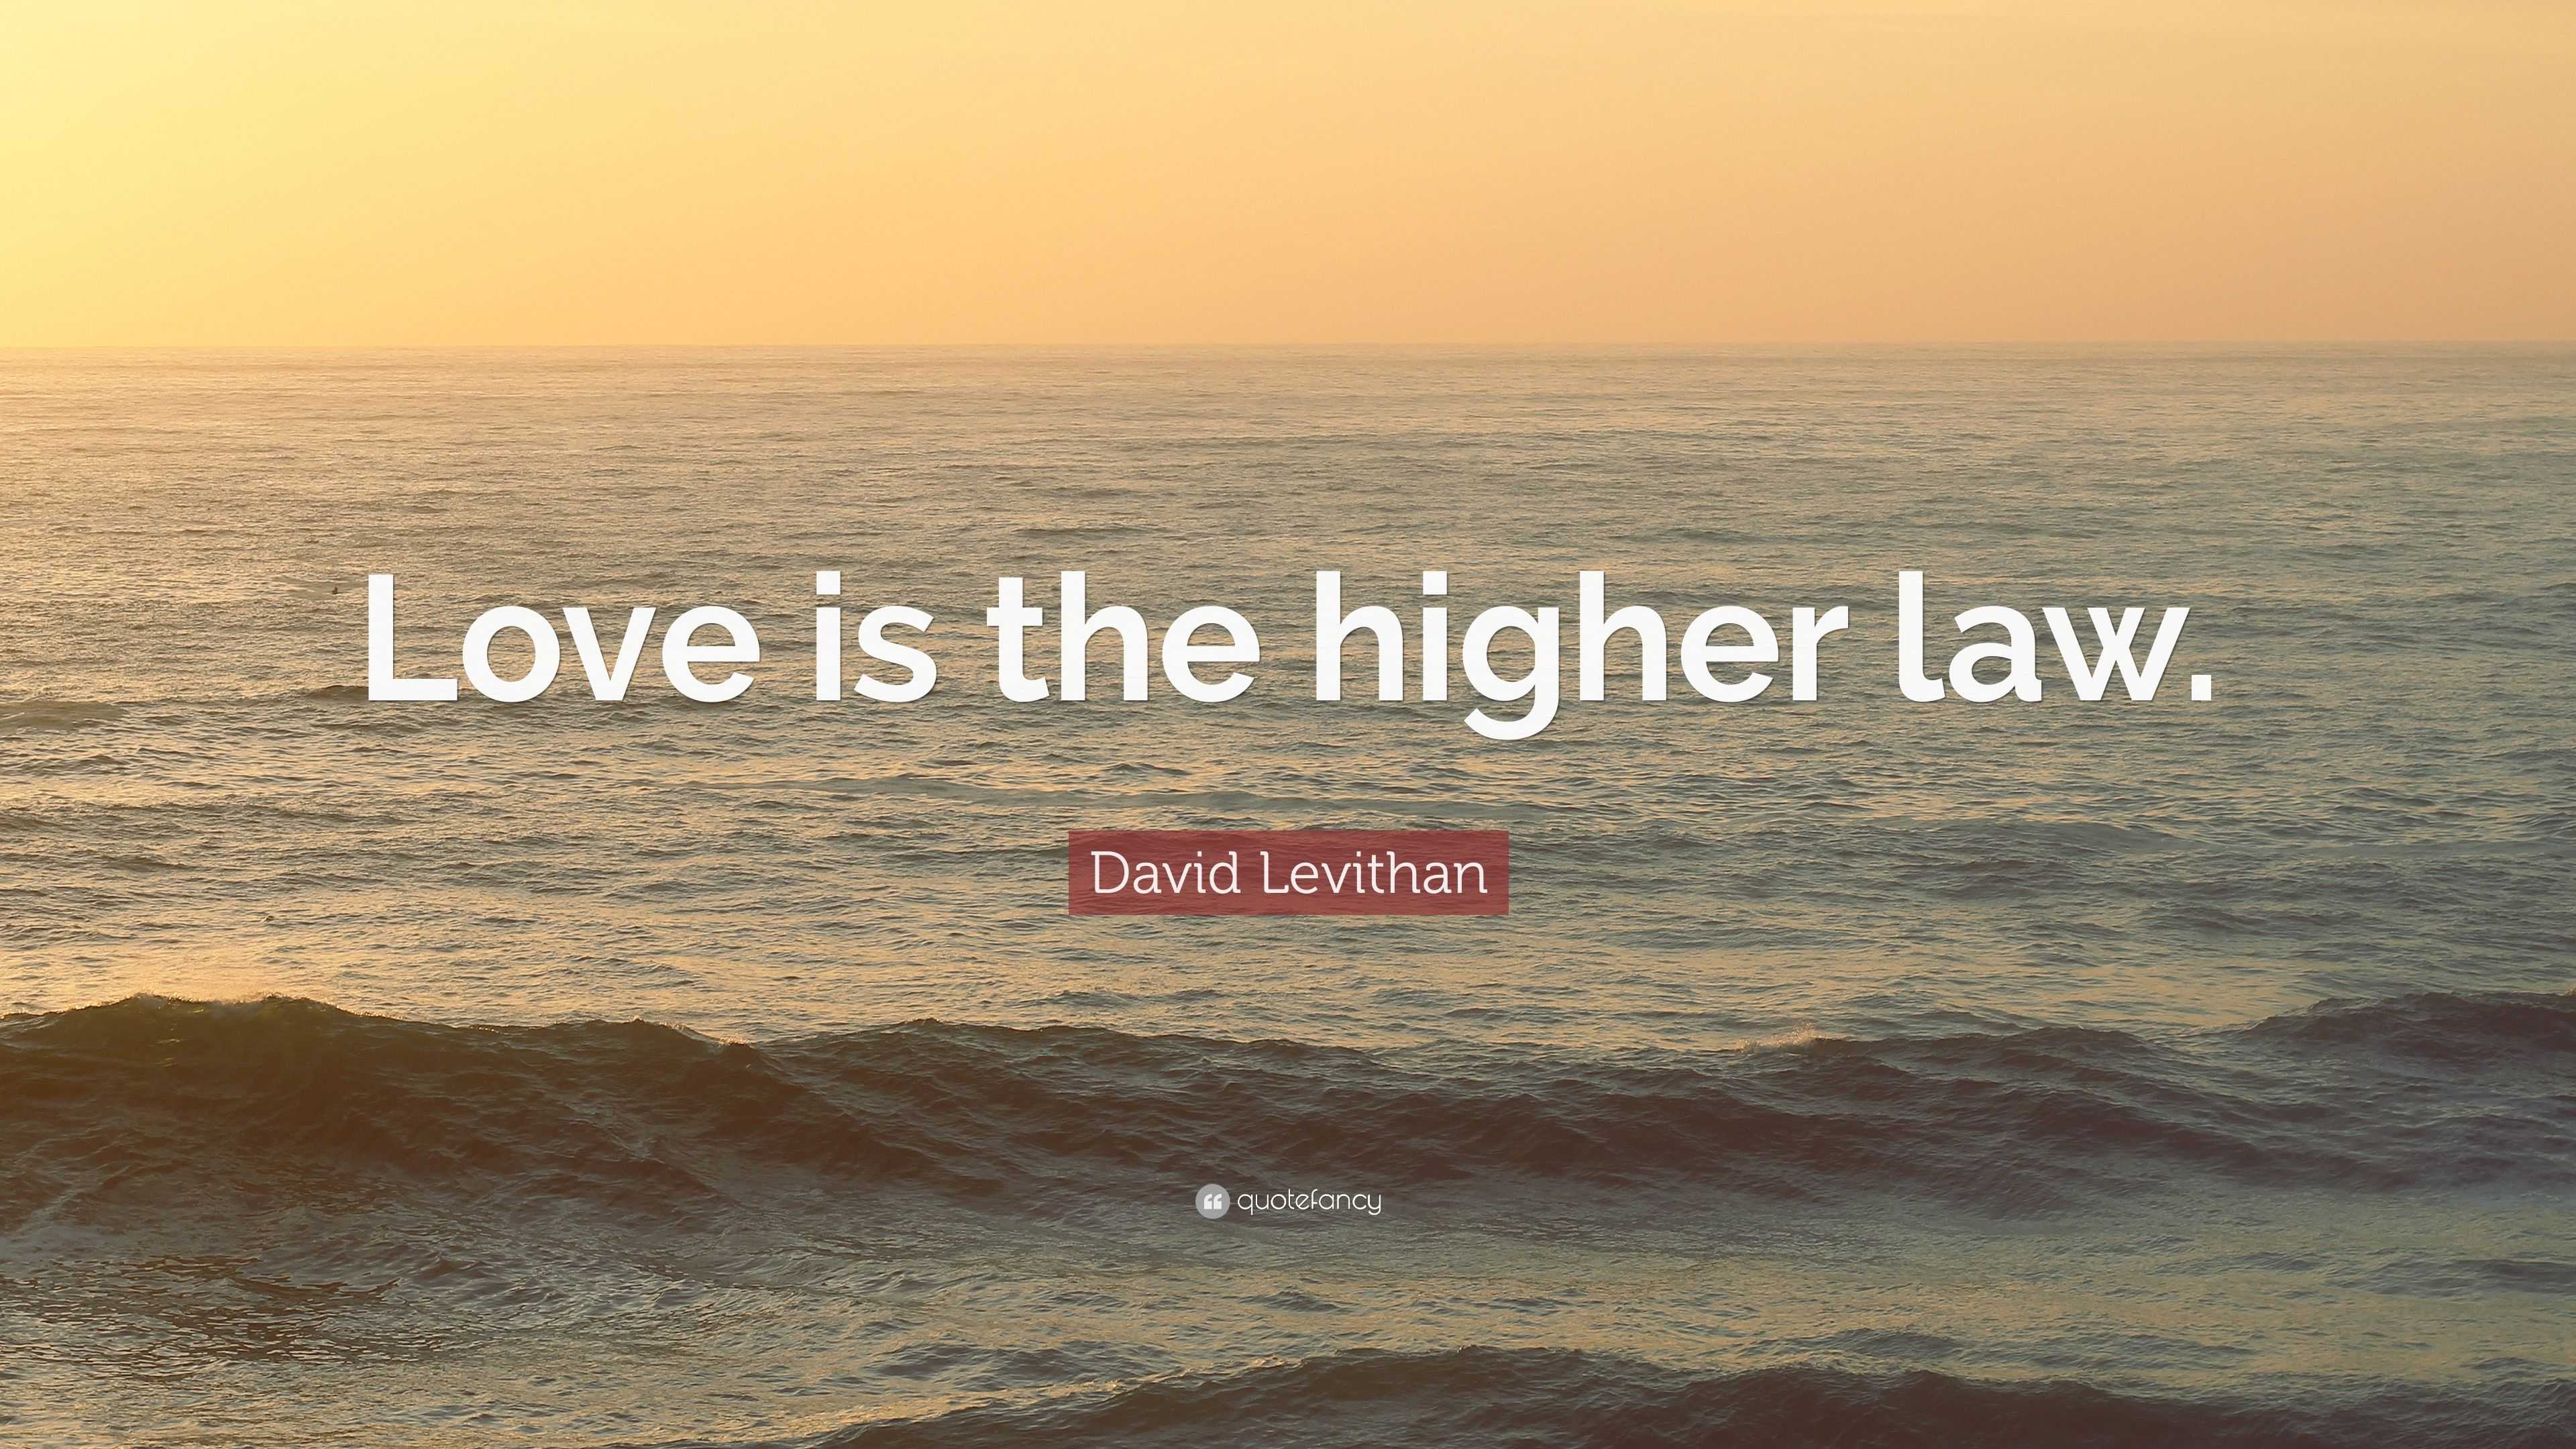 Love Is the Higher Law by David Levithan